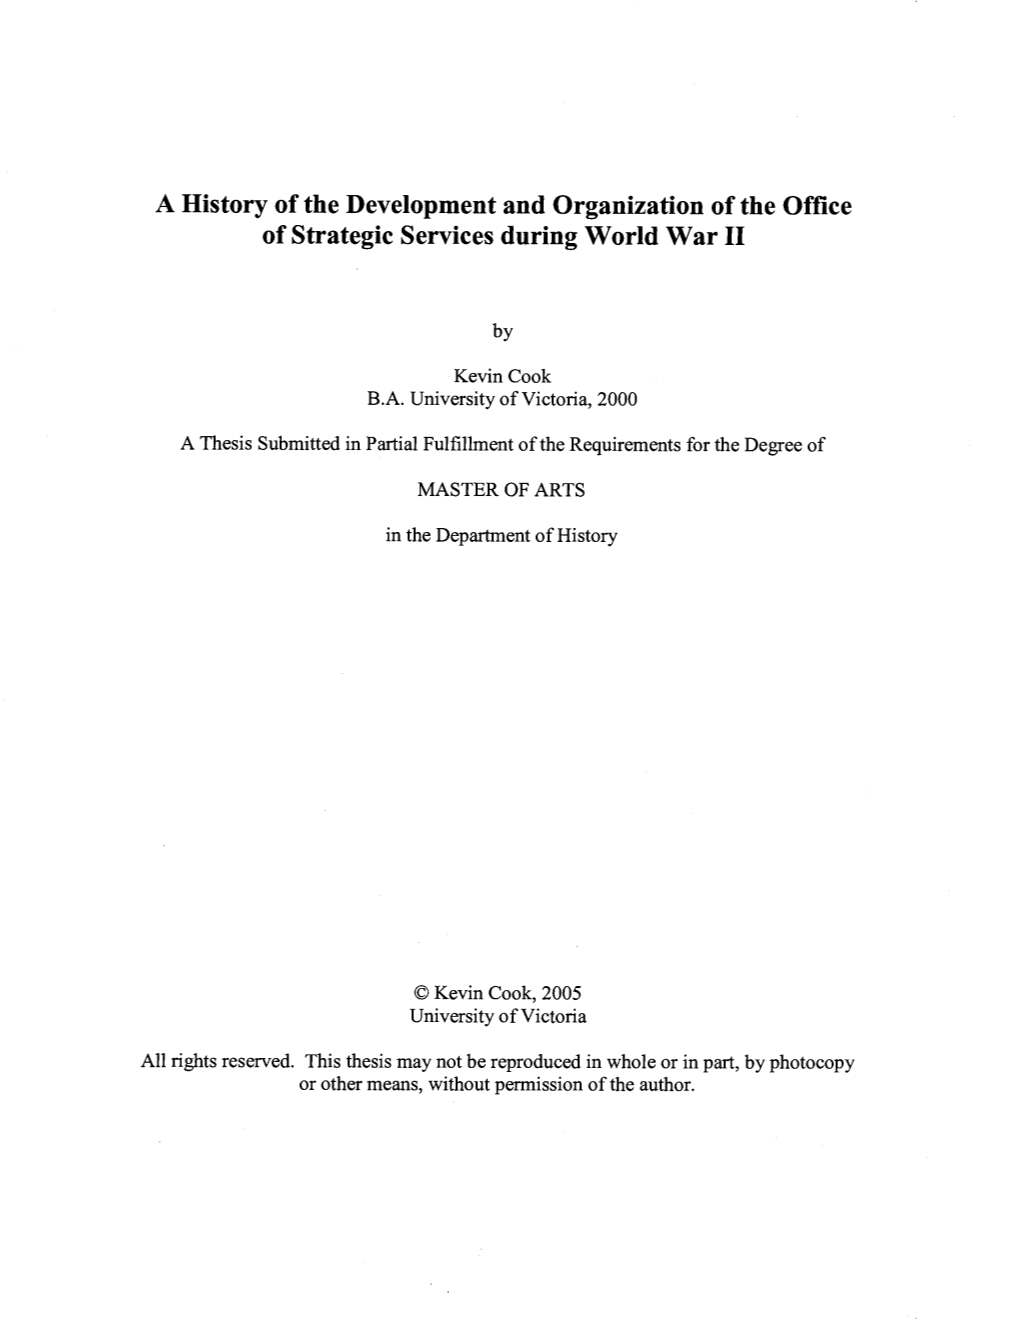 A History of the Development and Organization of the Office of Strategic Services During World War I1